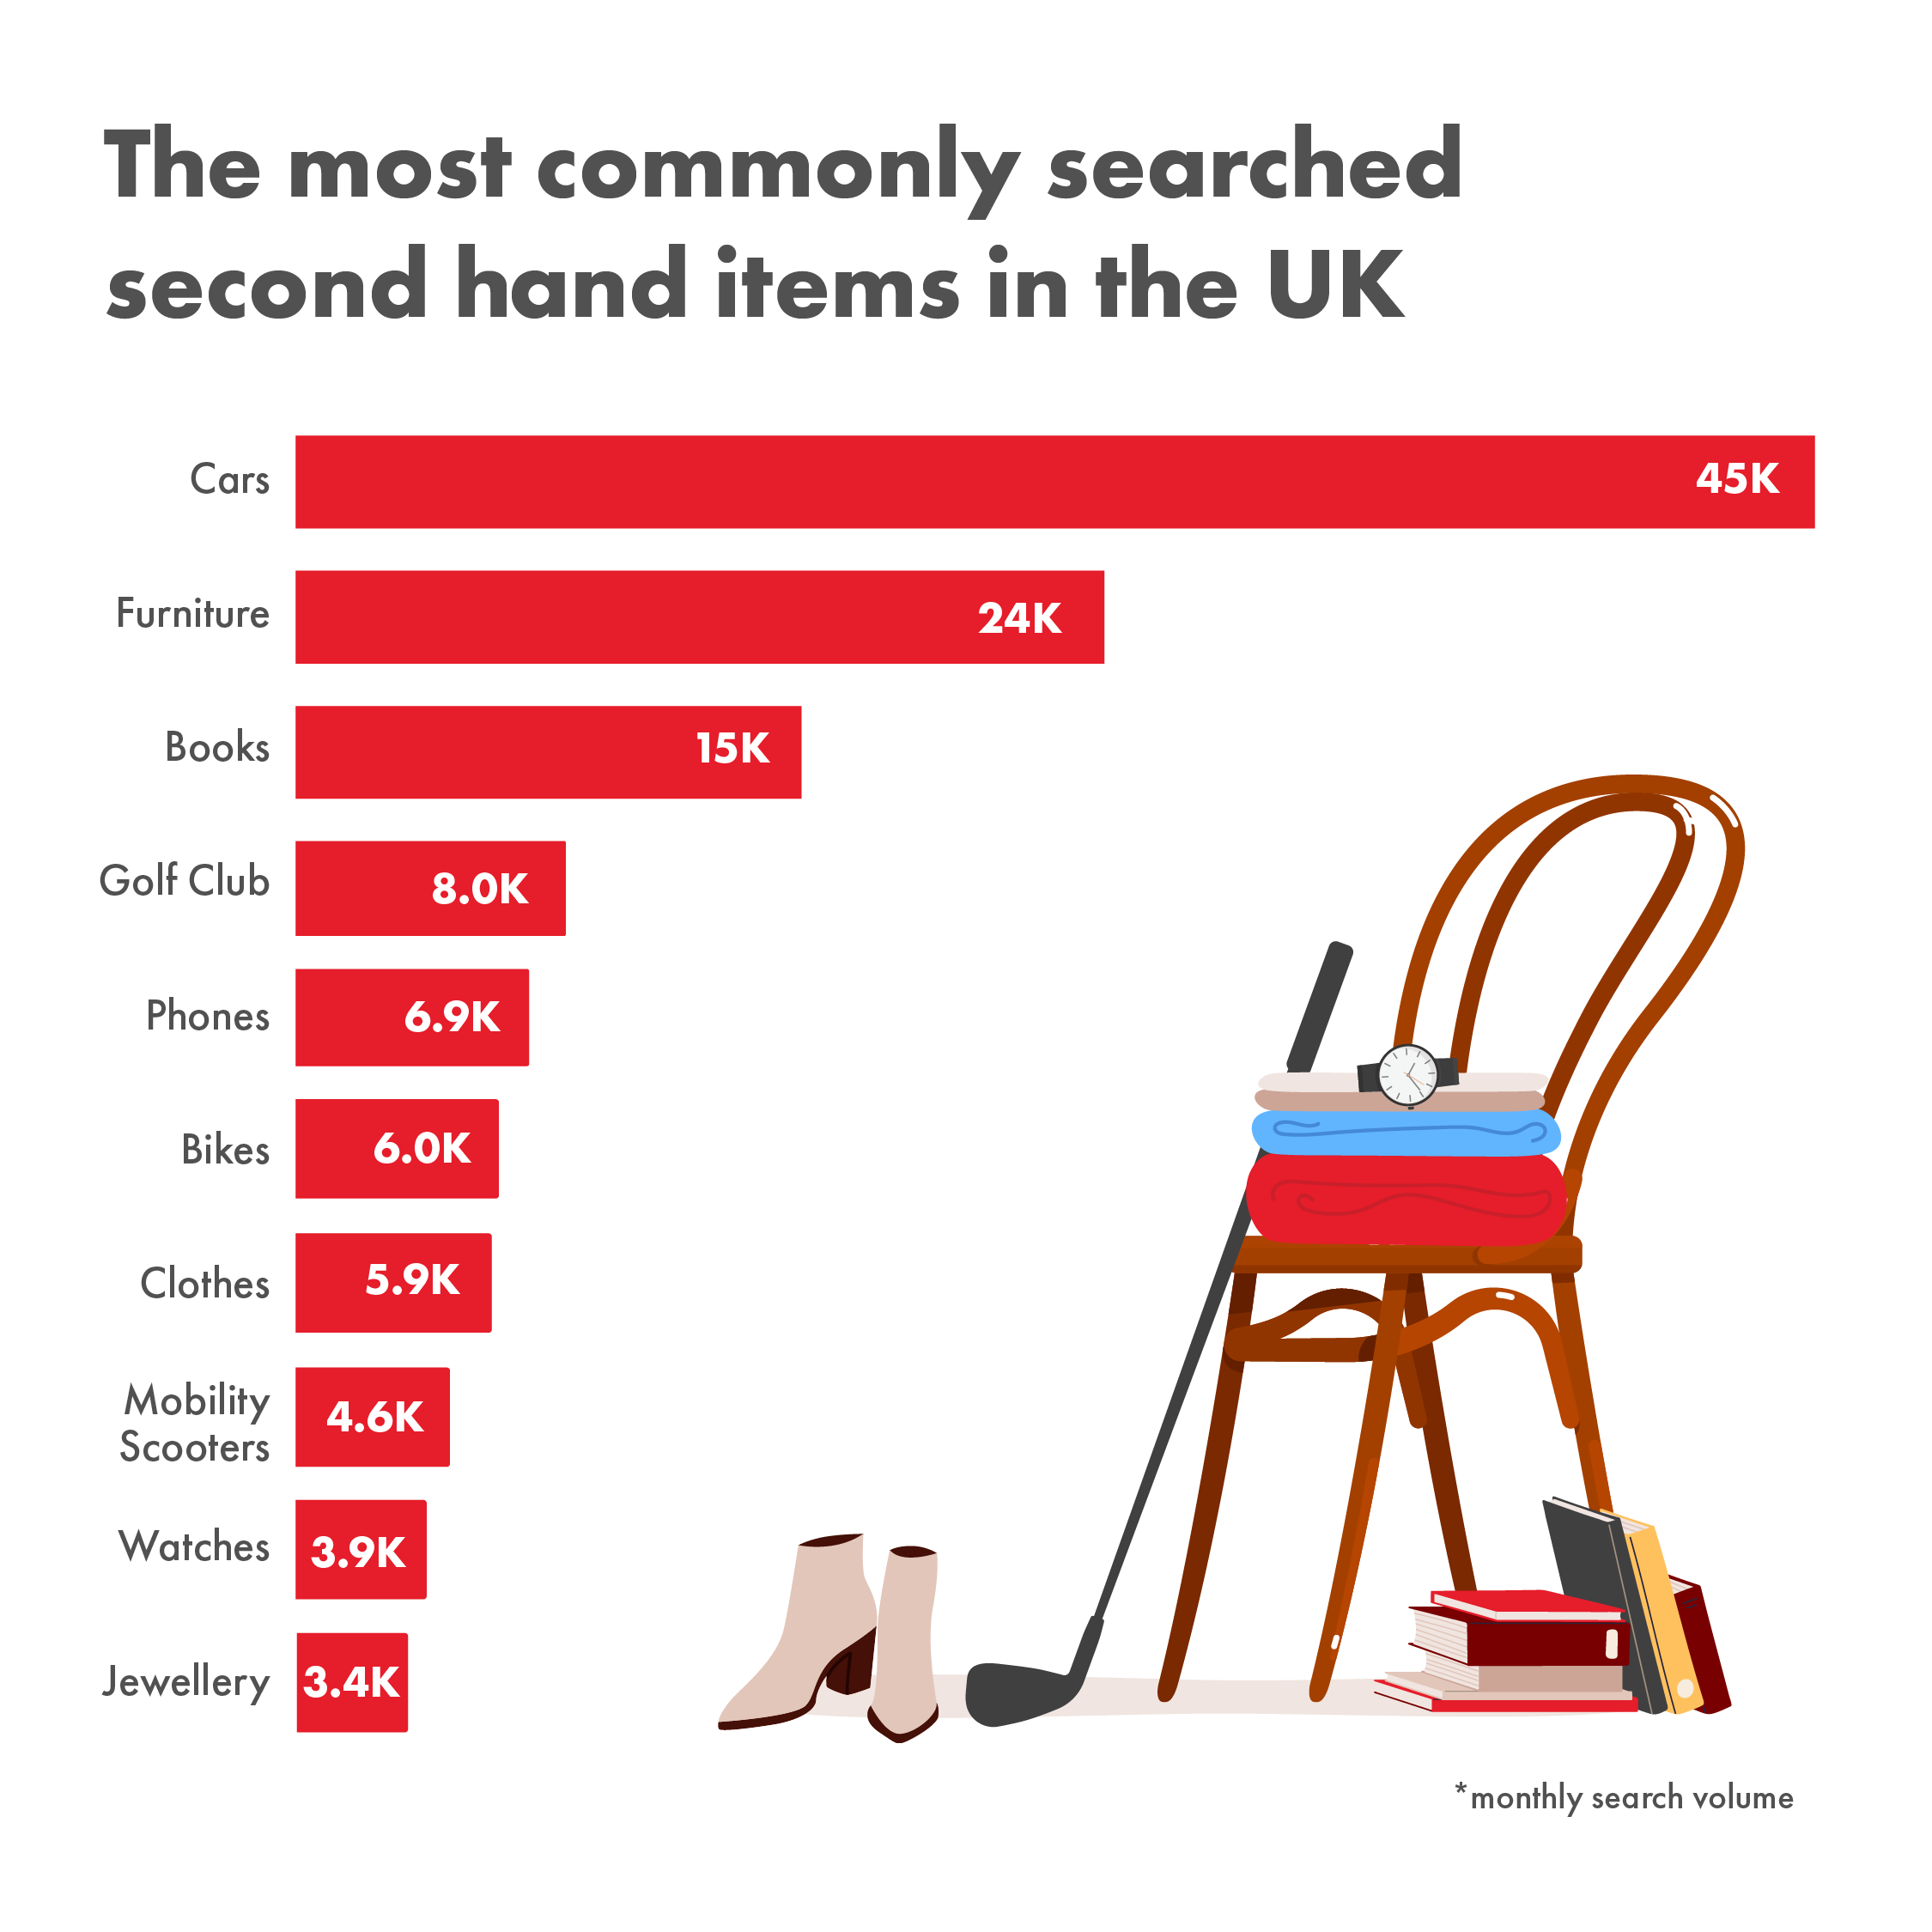 The most searched second hand items in the UK